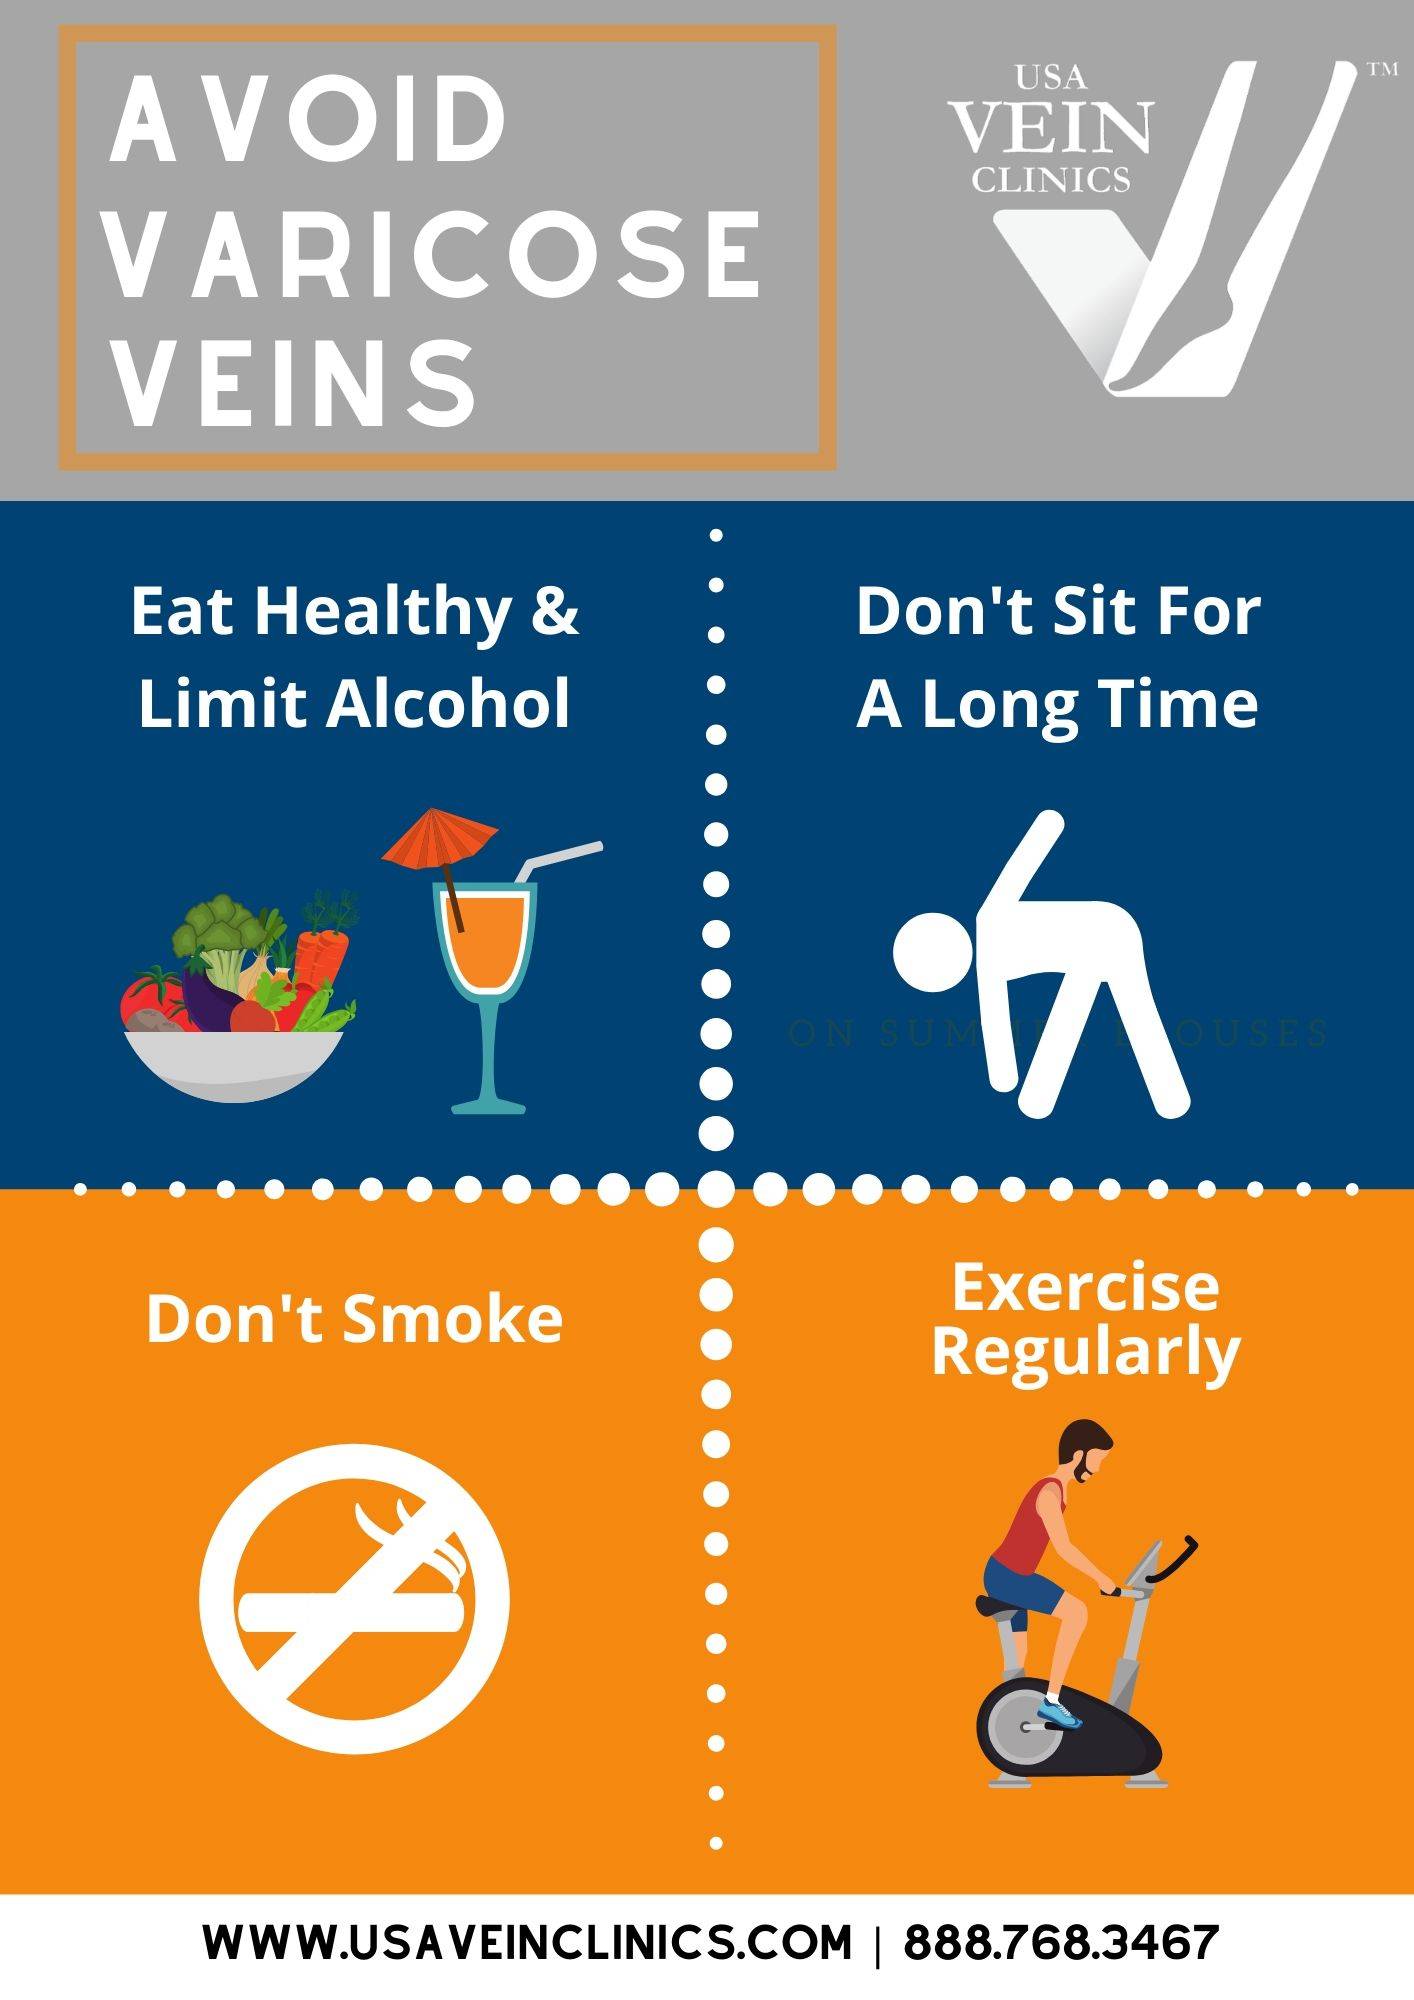 prevention infographic for varicose veins and vein disease